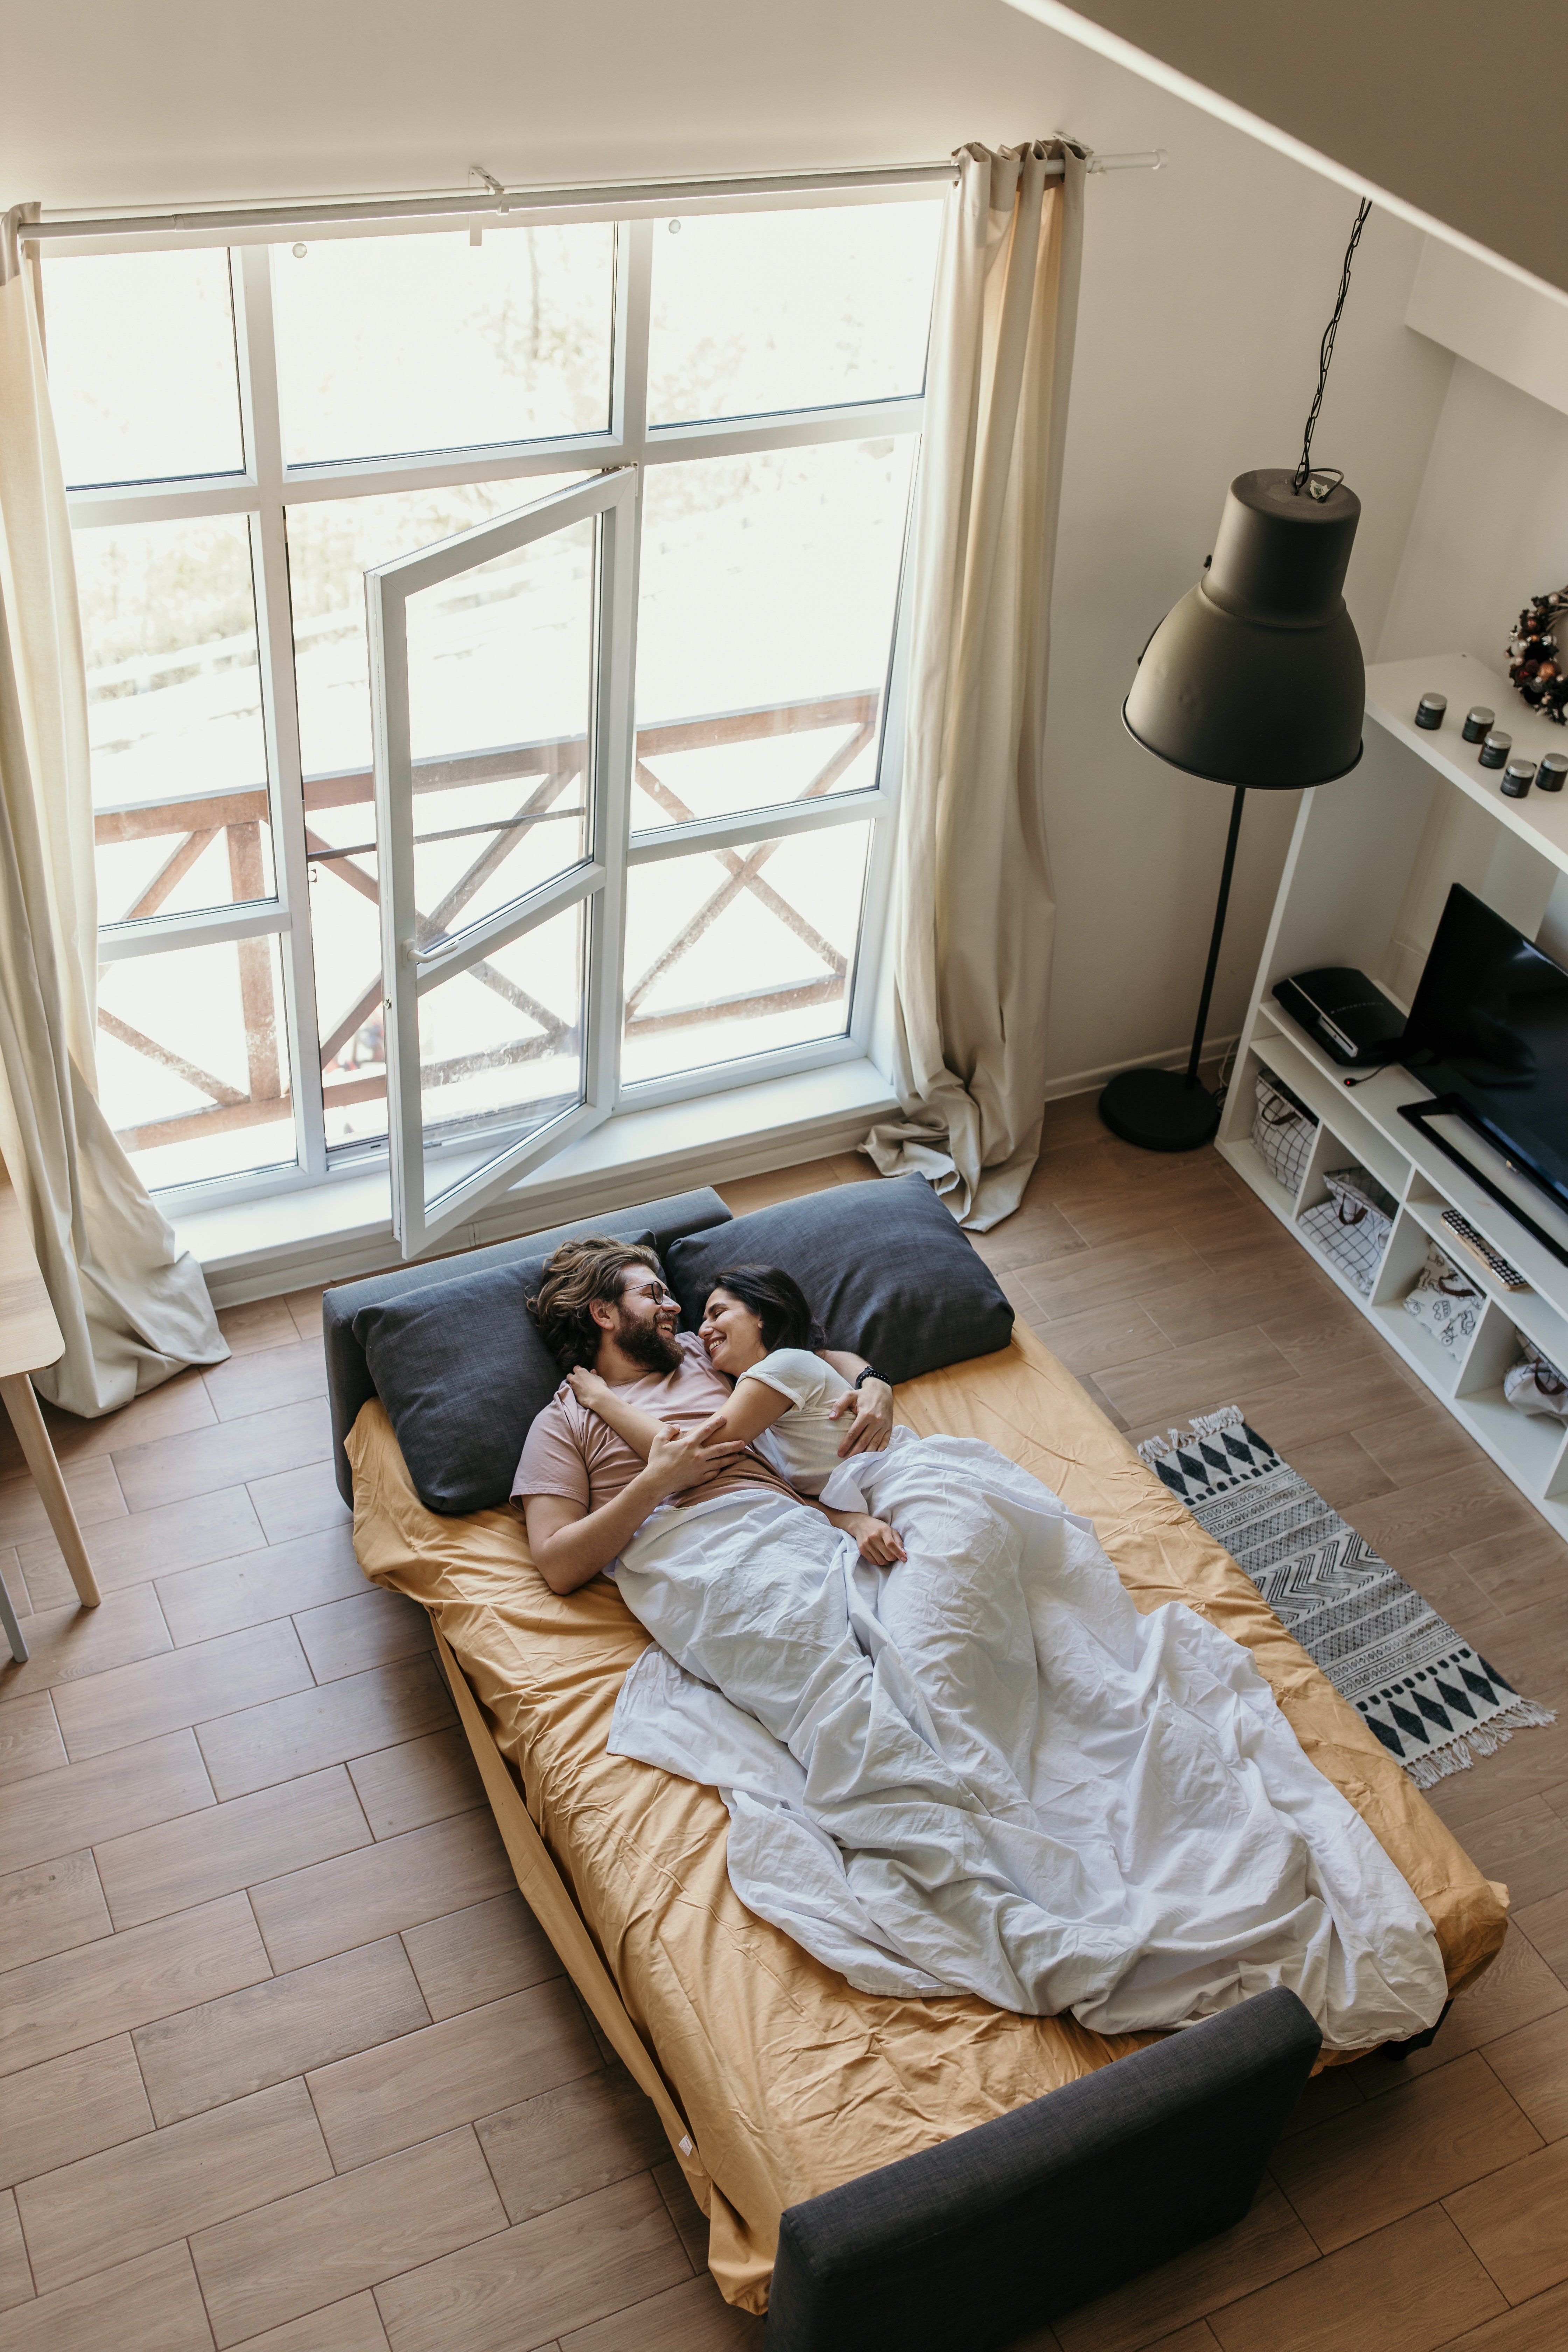 A couple lying together in bed. | Photo: Pexels